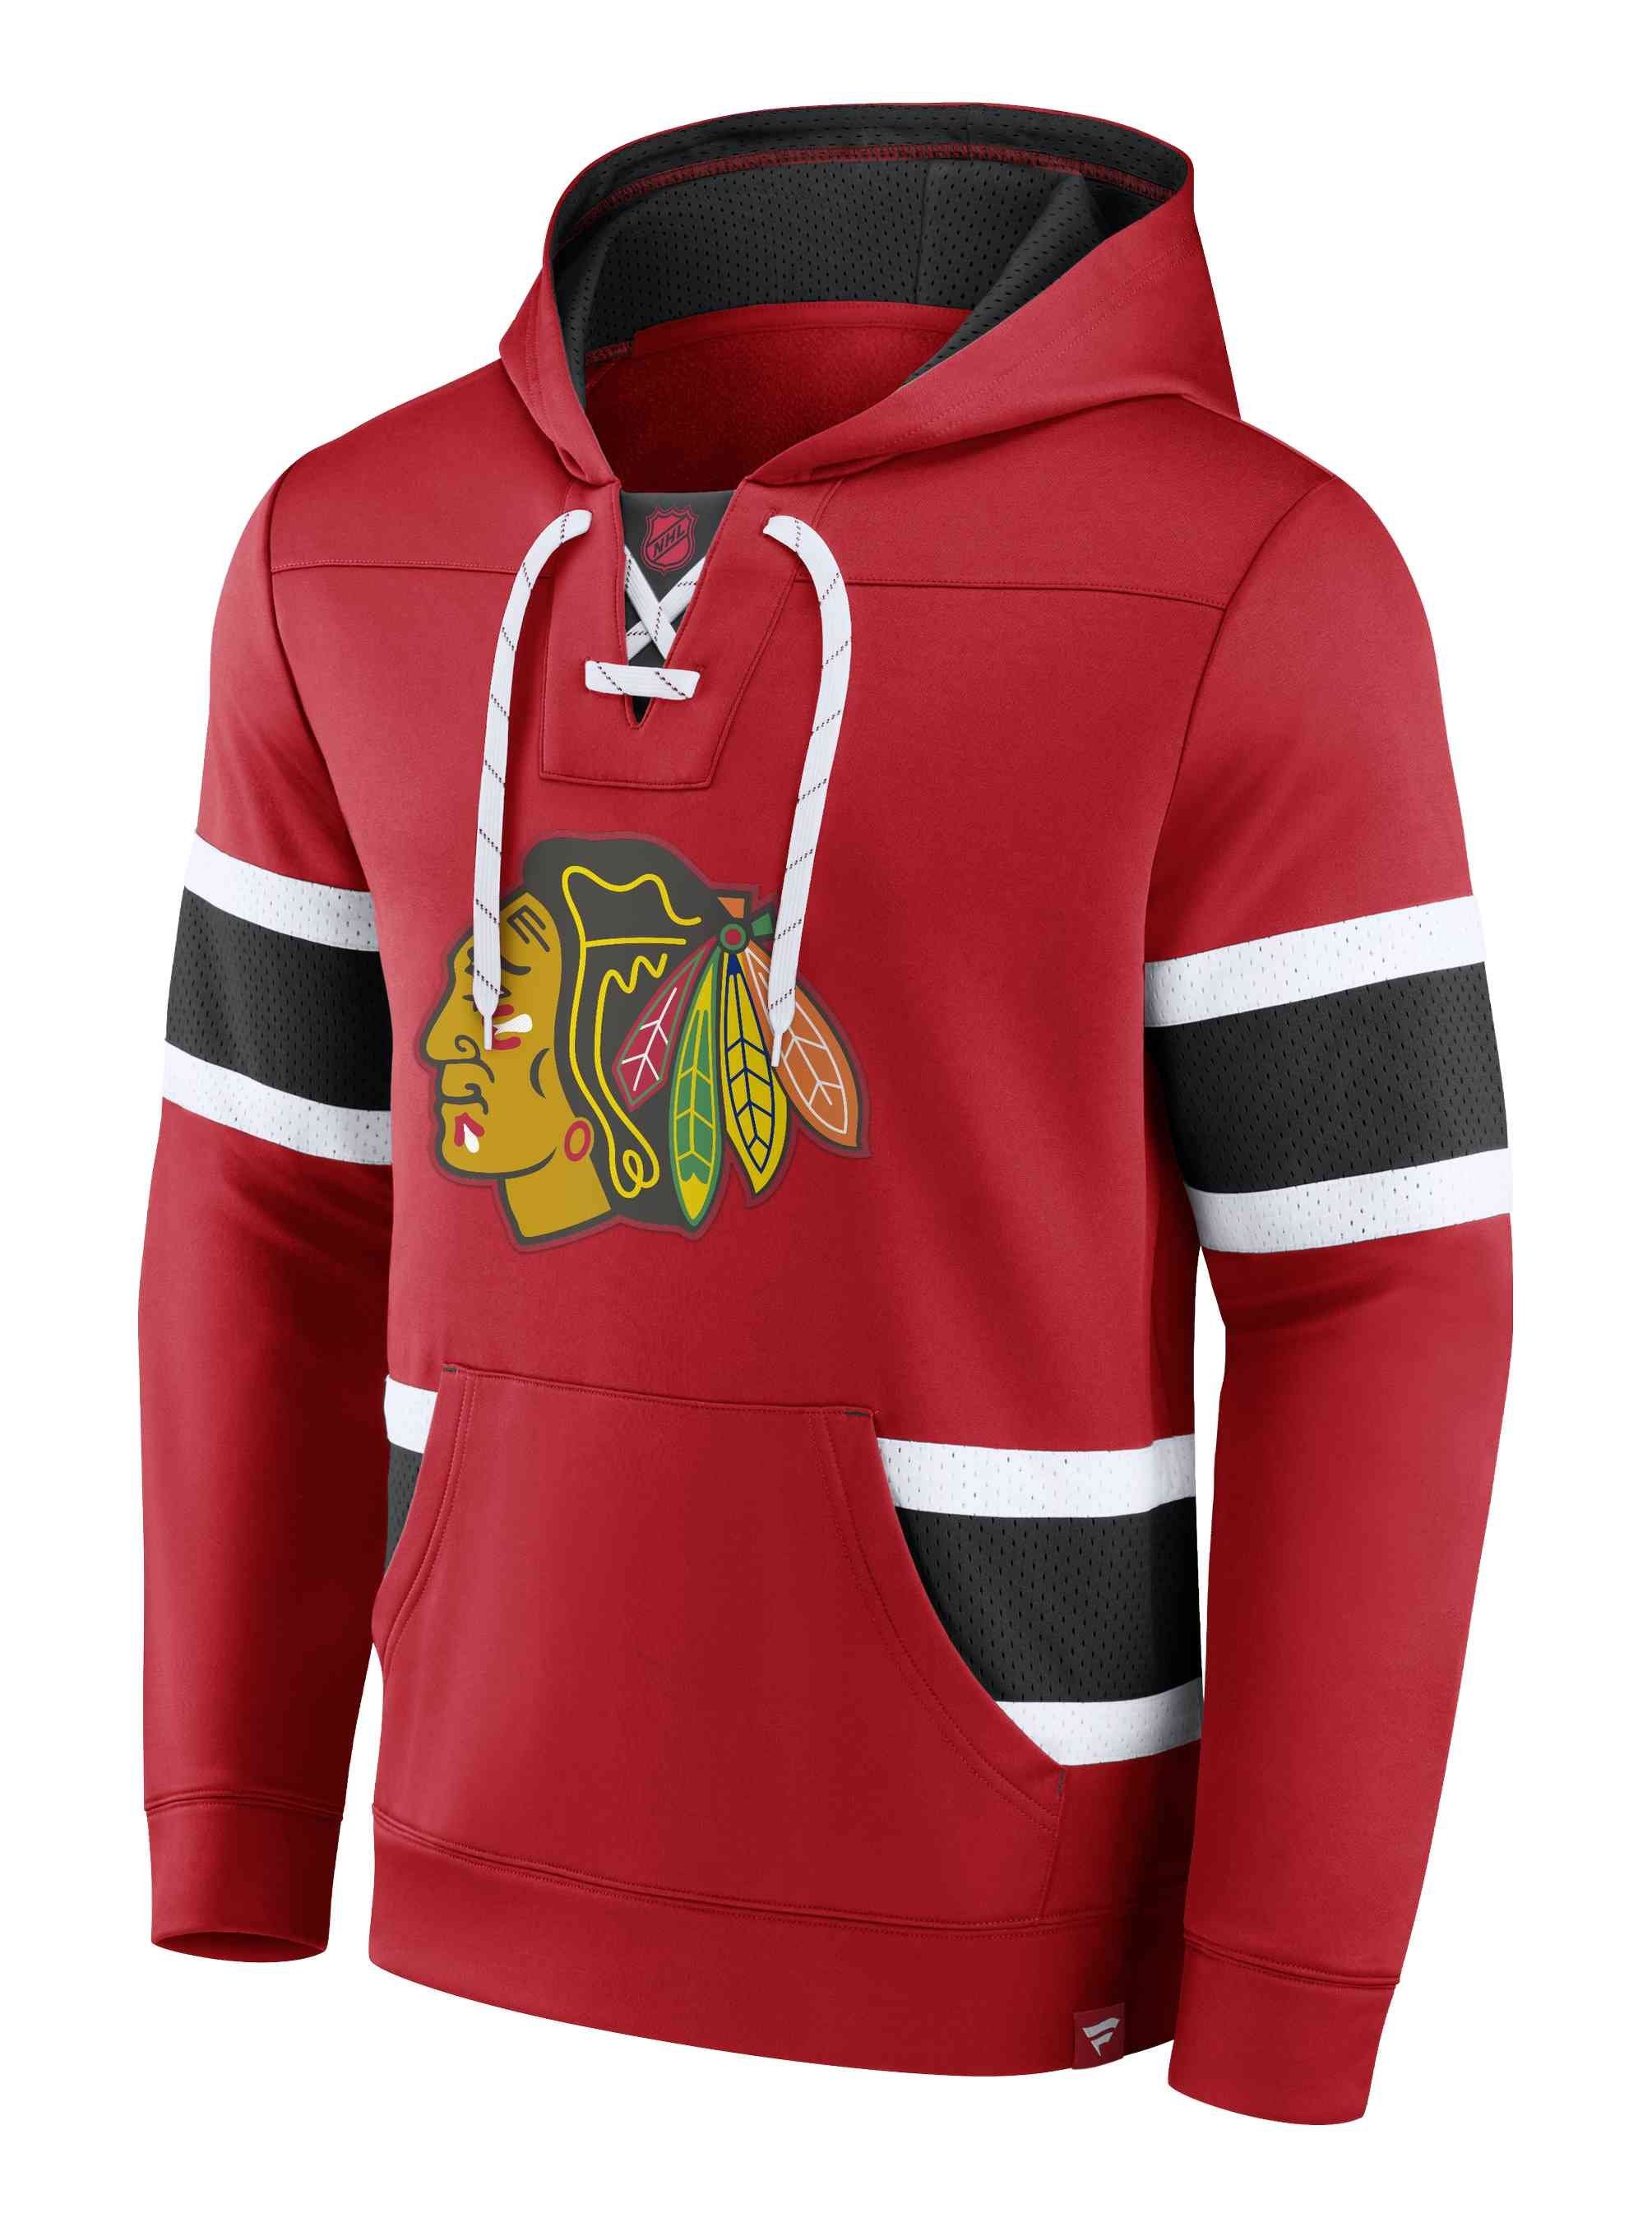 Fanatics Hoodie NHL Chicago Blackhawks Iconic Pullover Exclusive